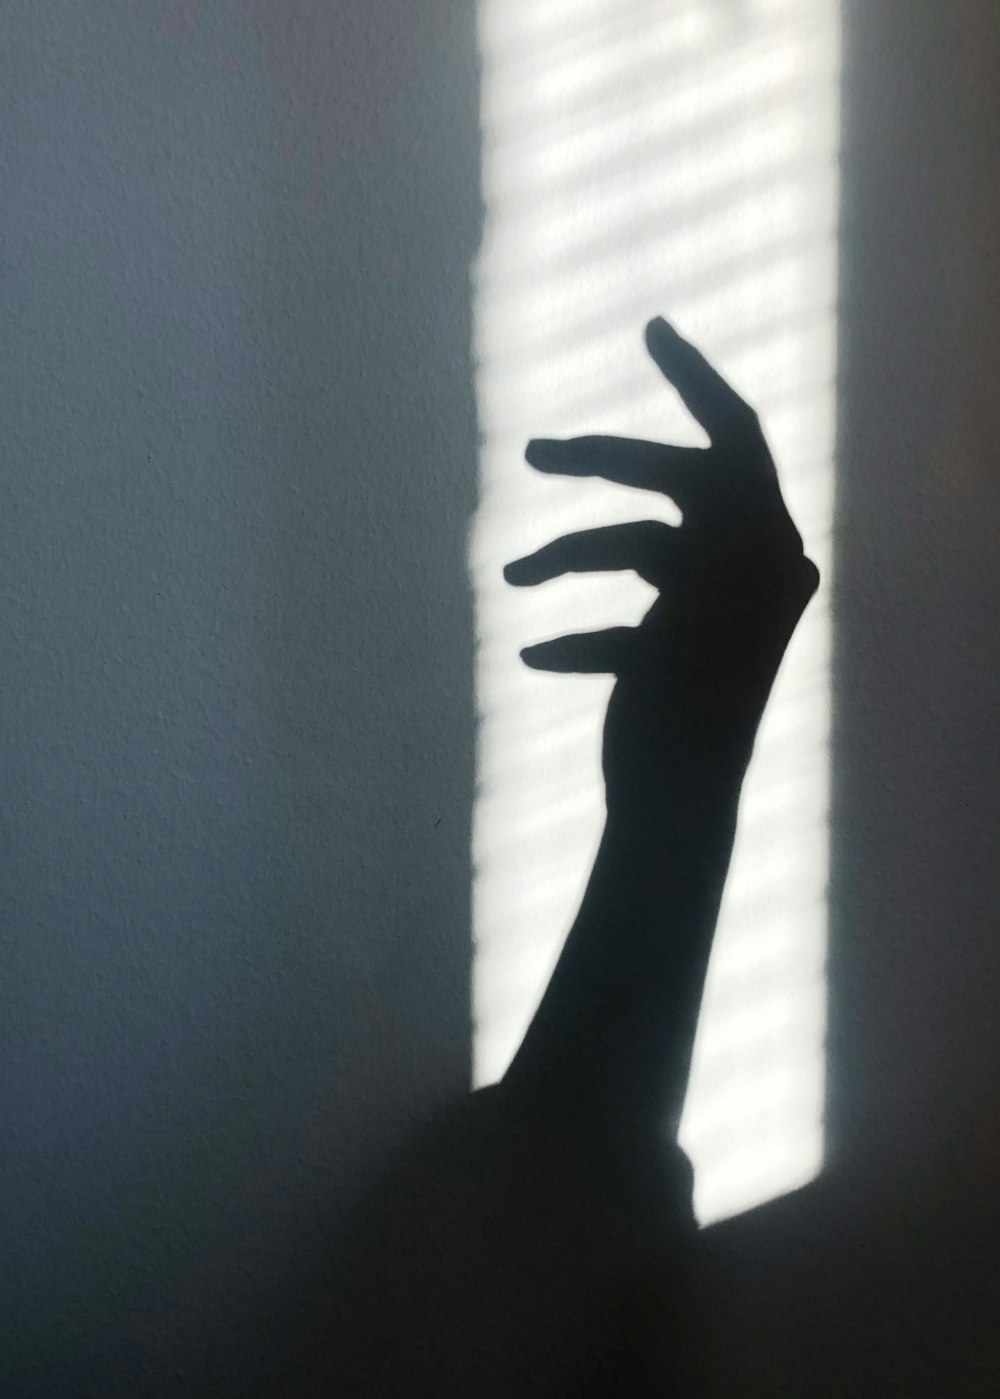 persons left hand near white window curtain